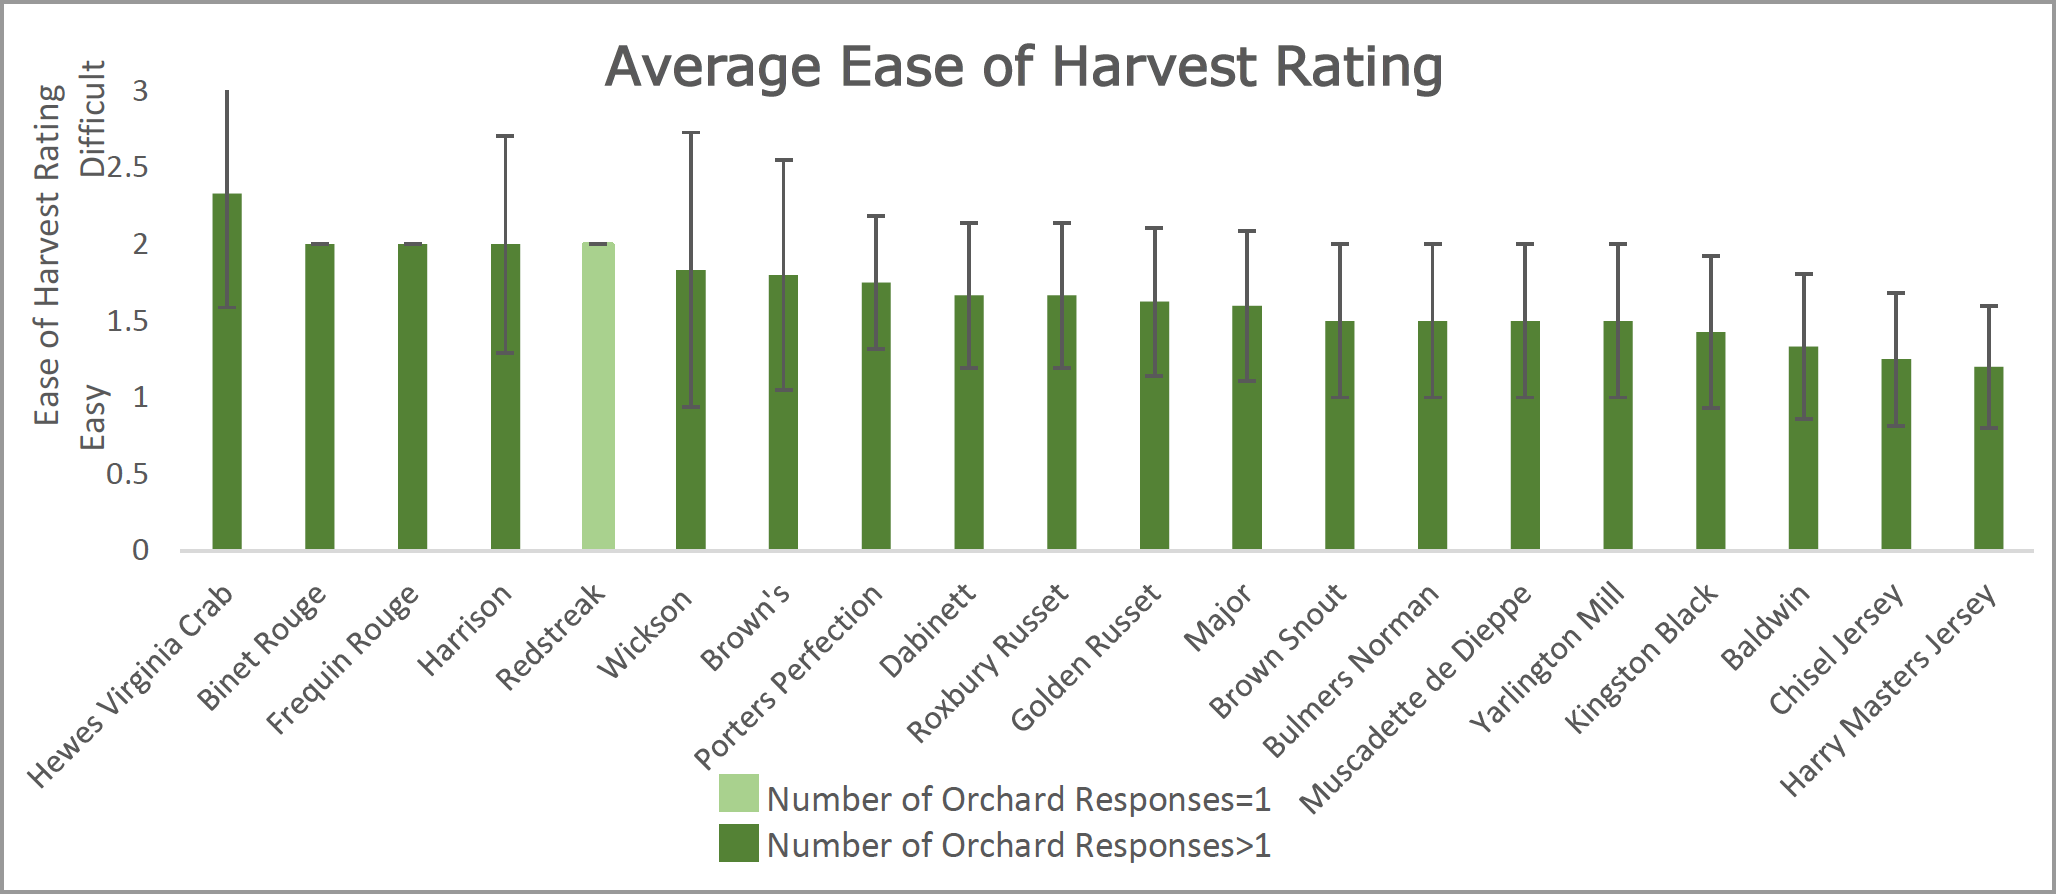 chart showing average ease of harvest rating of various apple varieties